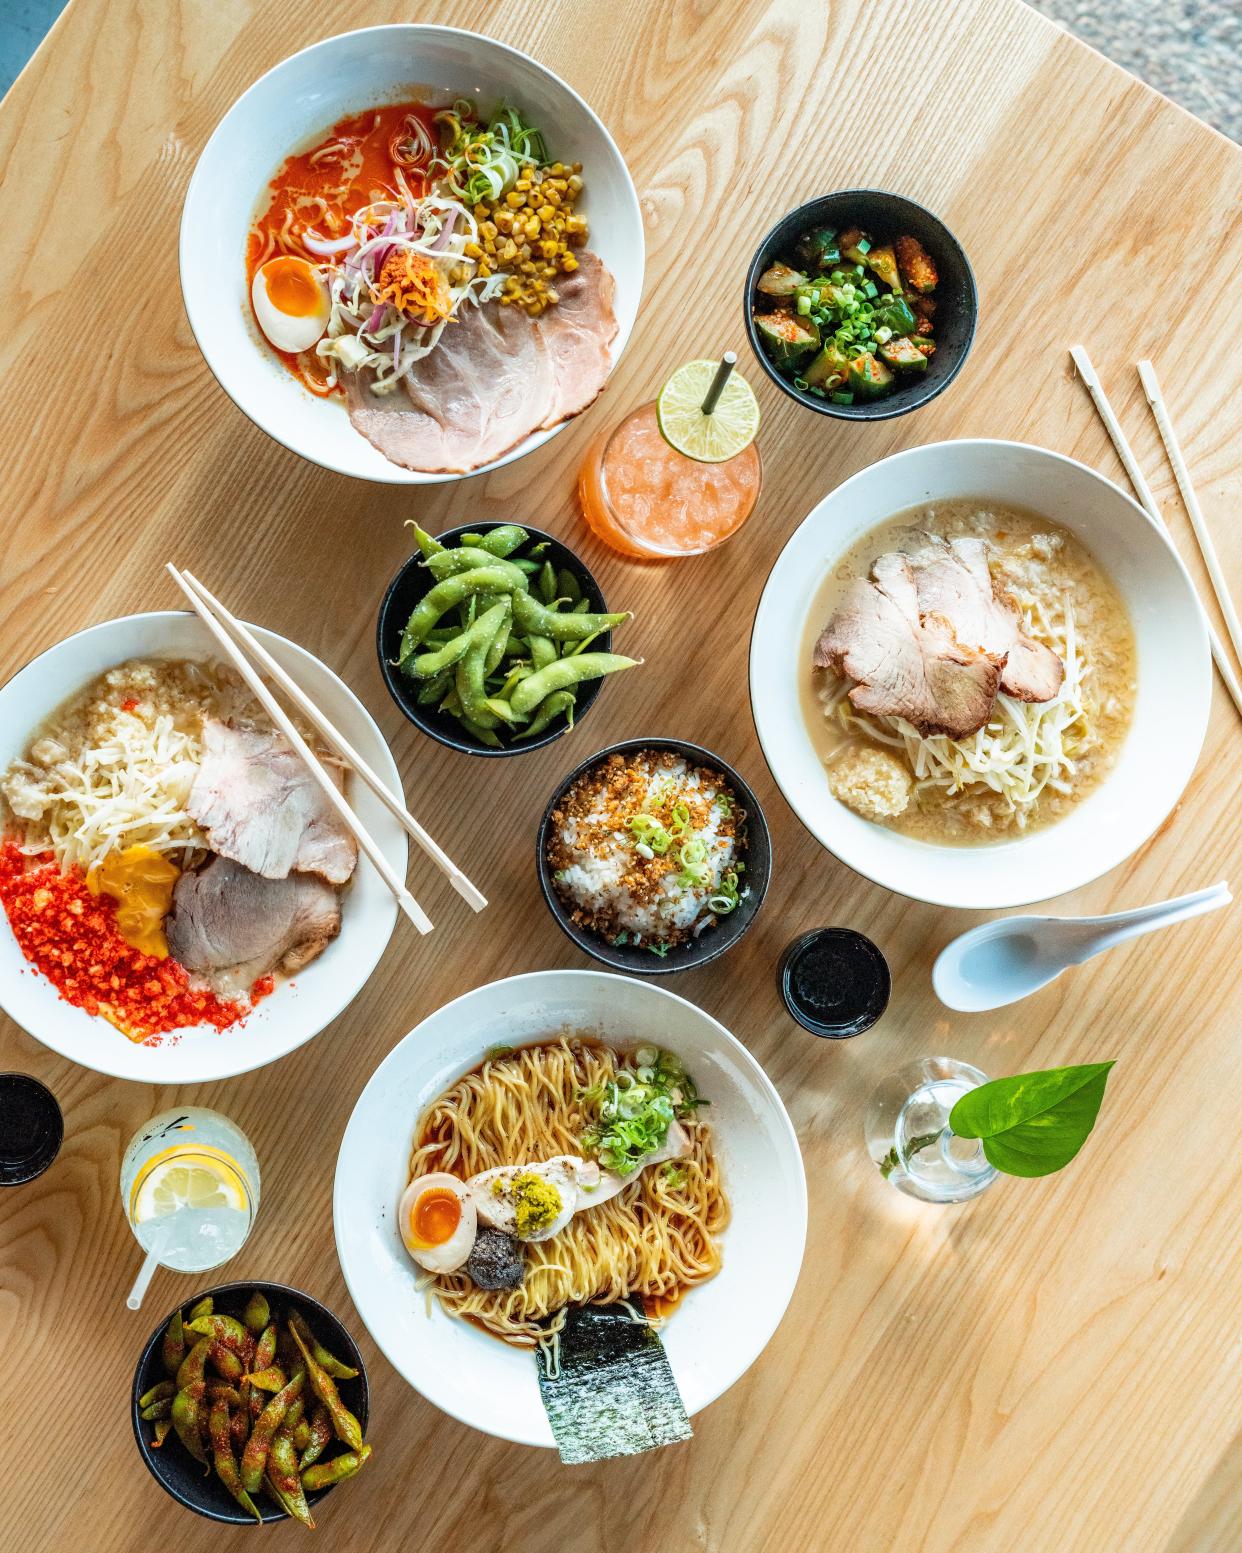 Daiboku Ramen serves a variety of appetizers in addition to bowls made with both chicken and pork broths.